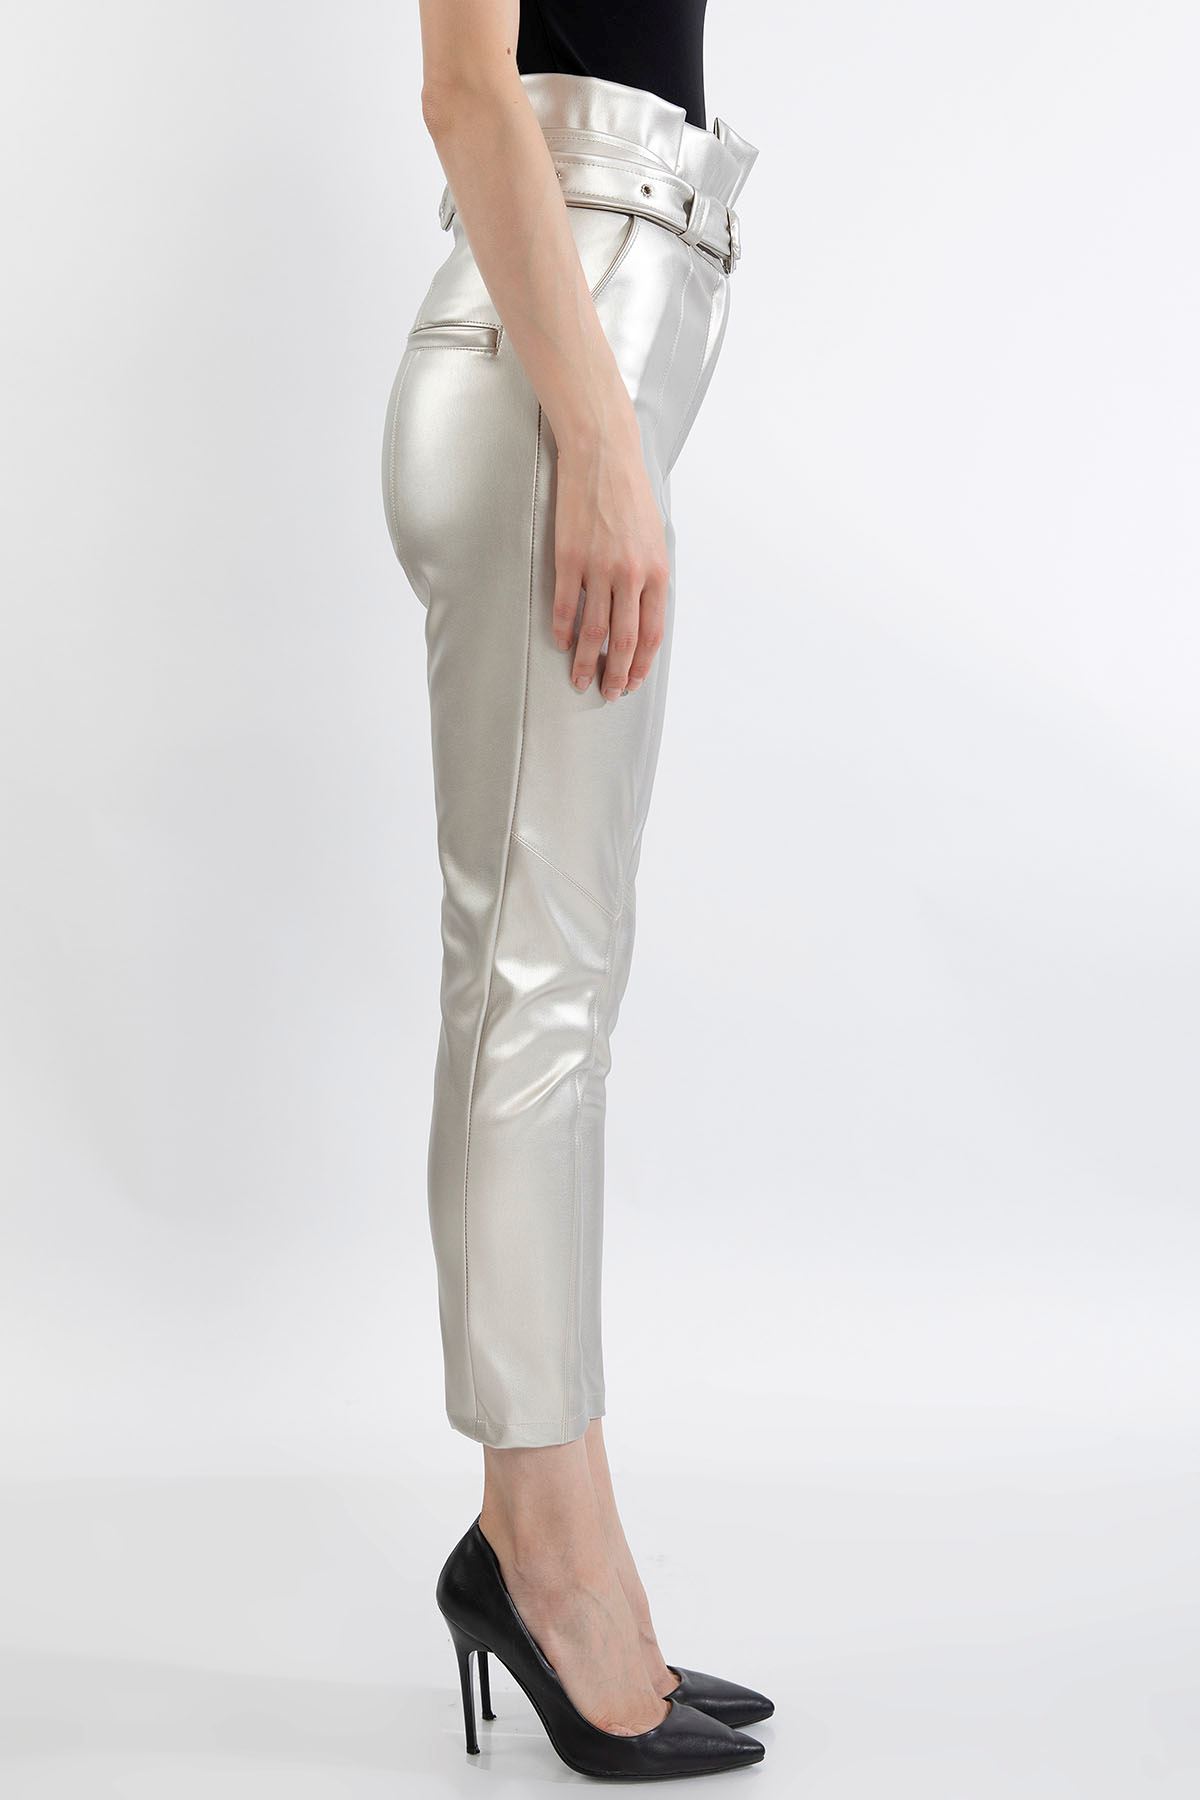 Zara Leather Fabric Ankle Length Tight Fit High Waist Belt Women'S Trouser - Silver